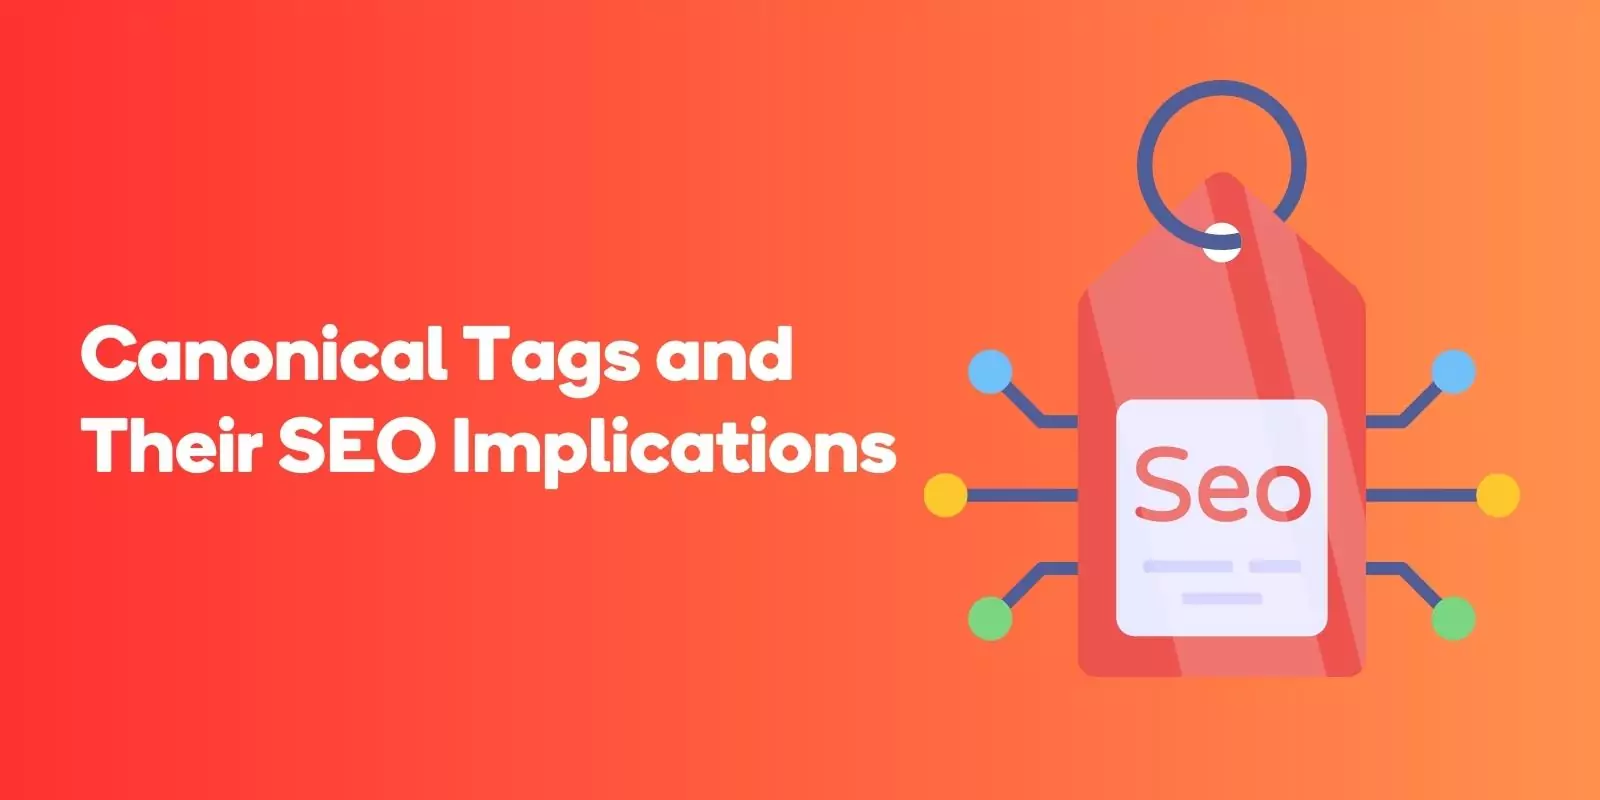 Canonical Tags and Their SEO Implications